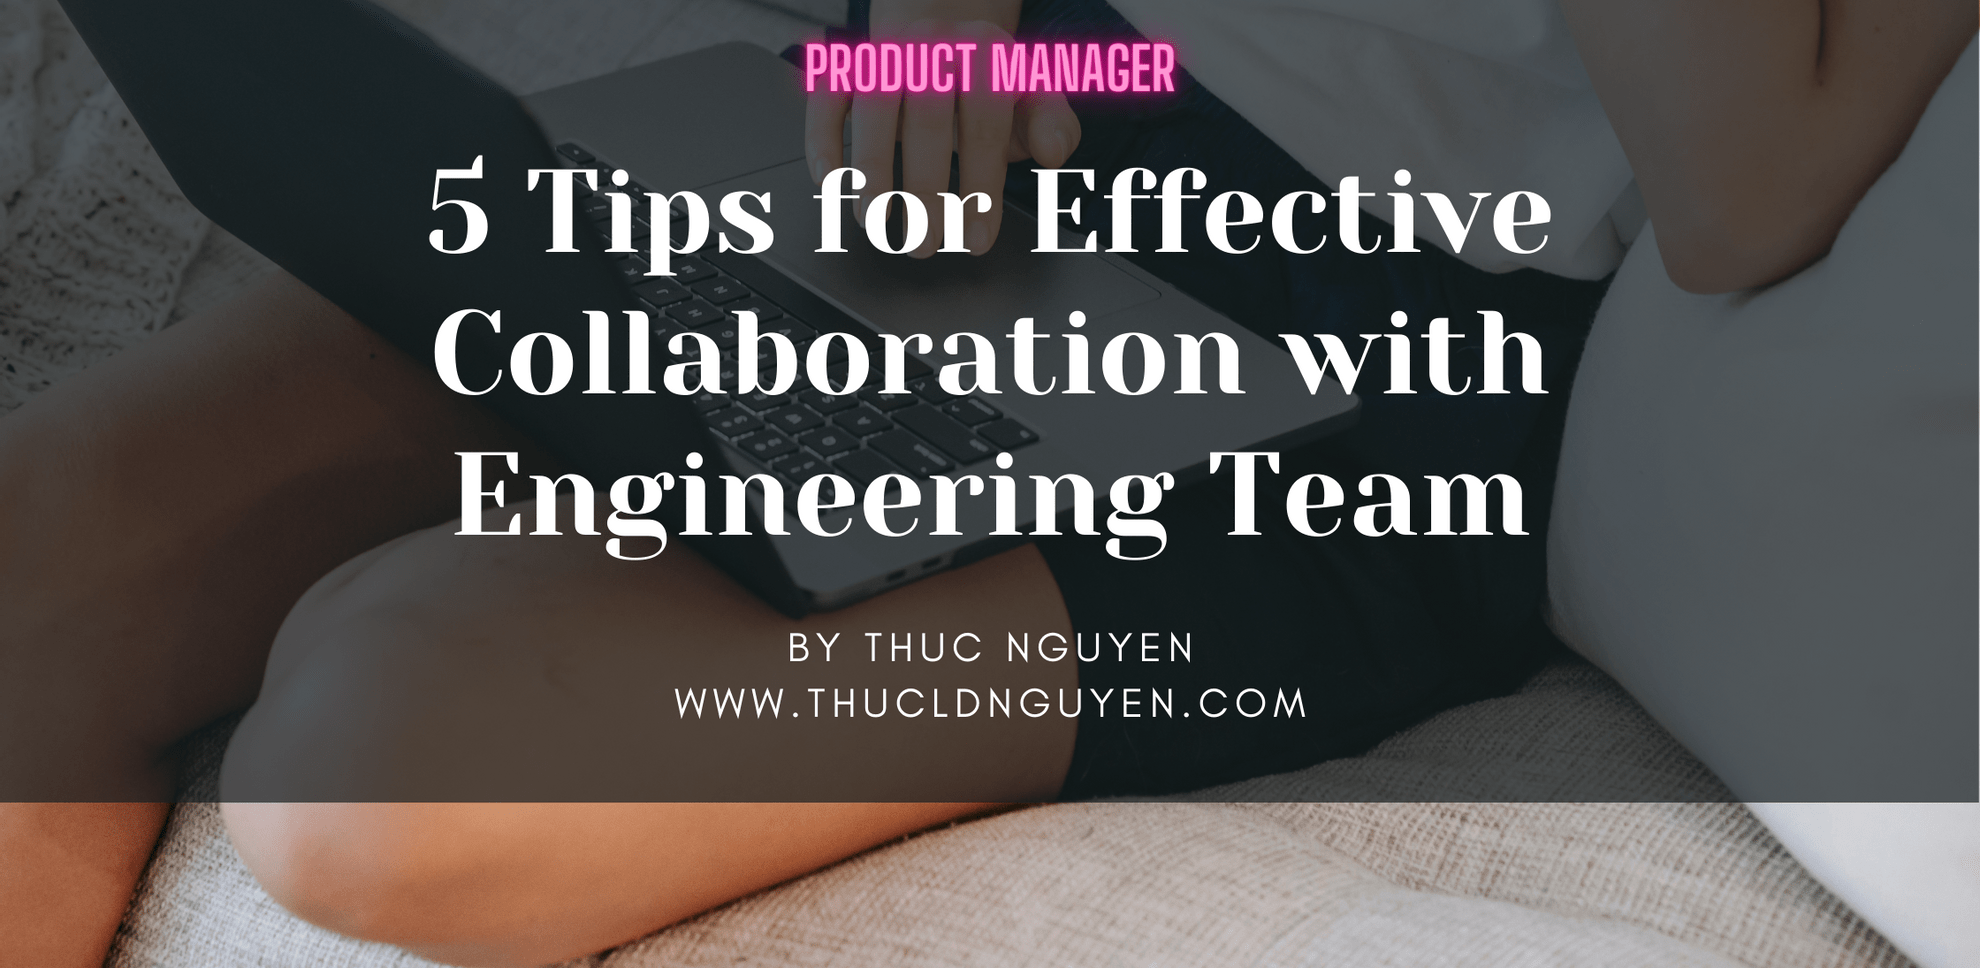 5 Tips for Effective Collaboration with Your Engineering Team as Product Manager - Featured image